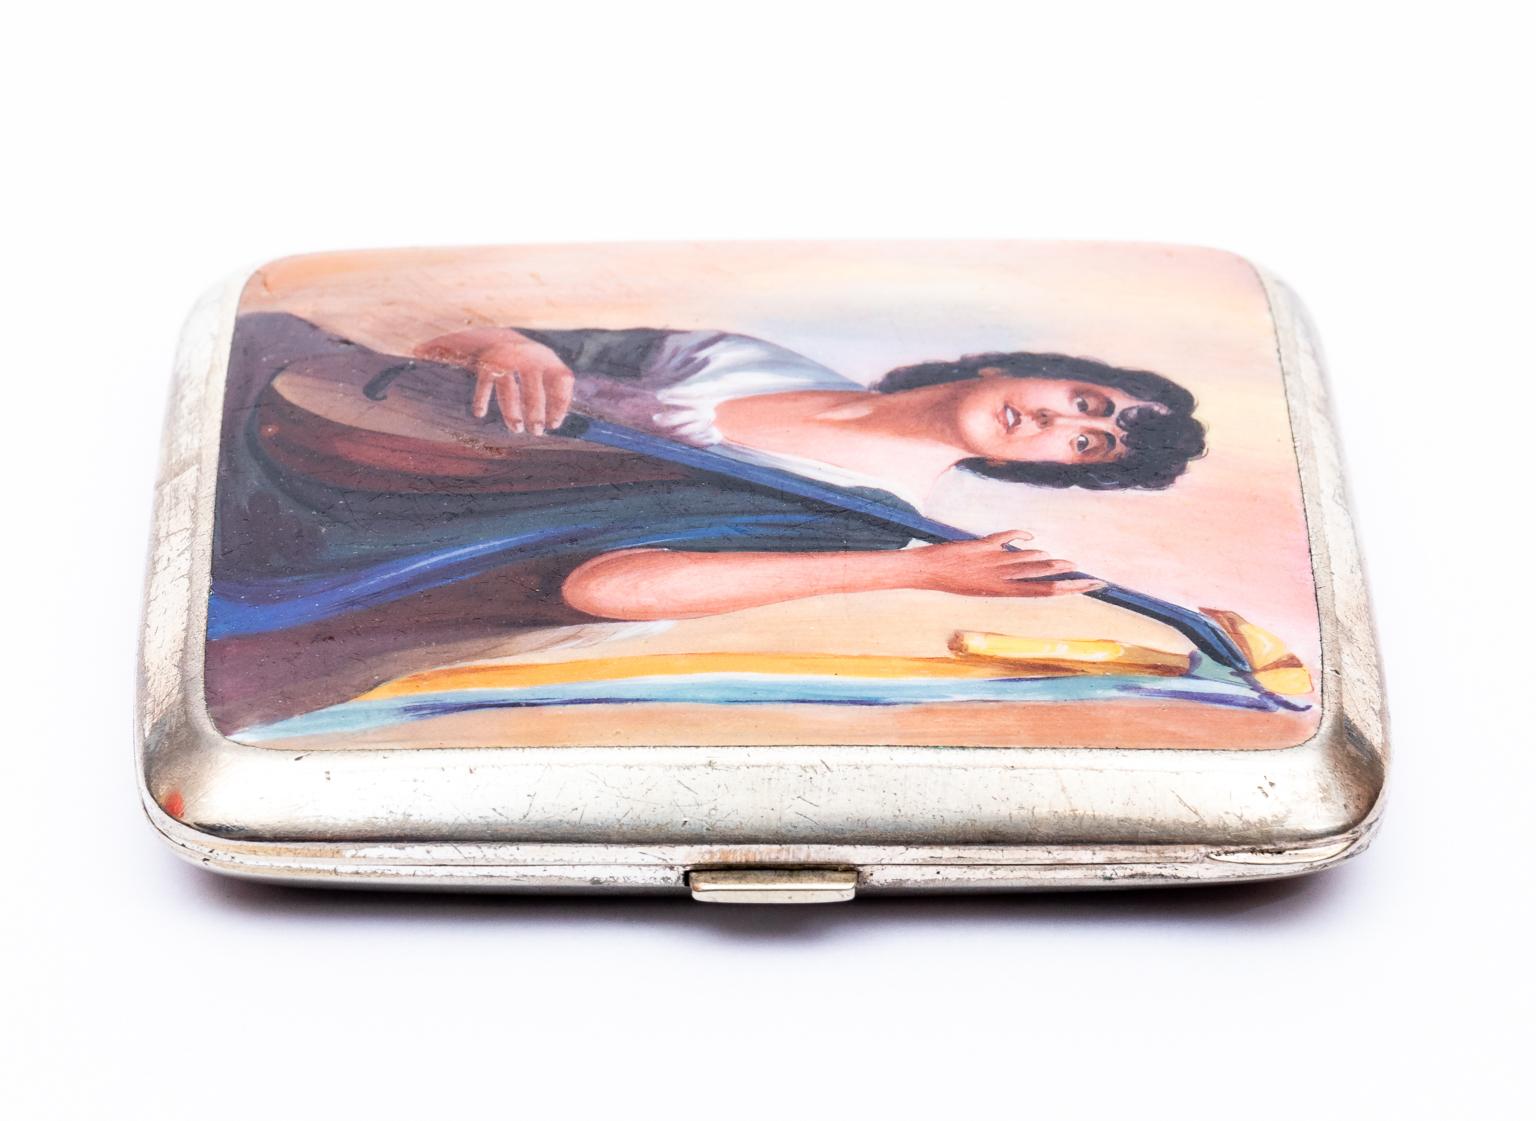 Circa 1900-1940s antique Russian silver and enamel cigarette case. The piece is solidly made and features hand painted enamel depicting a young girl playing on a guitar on the exterior and a gilded interior. The case is also marked with a woman's